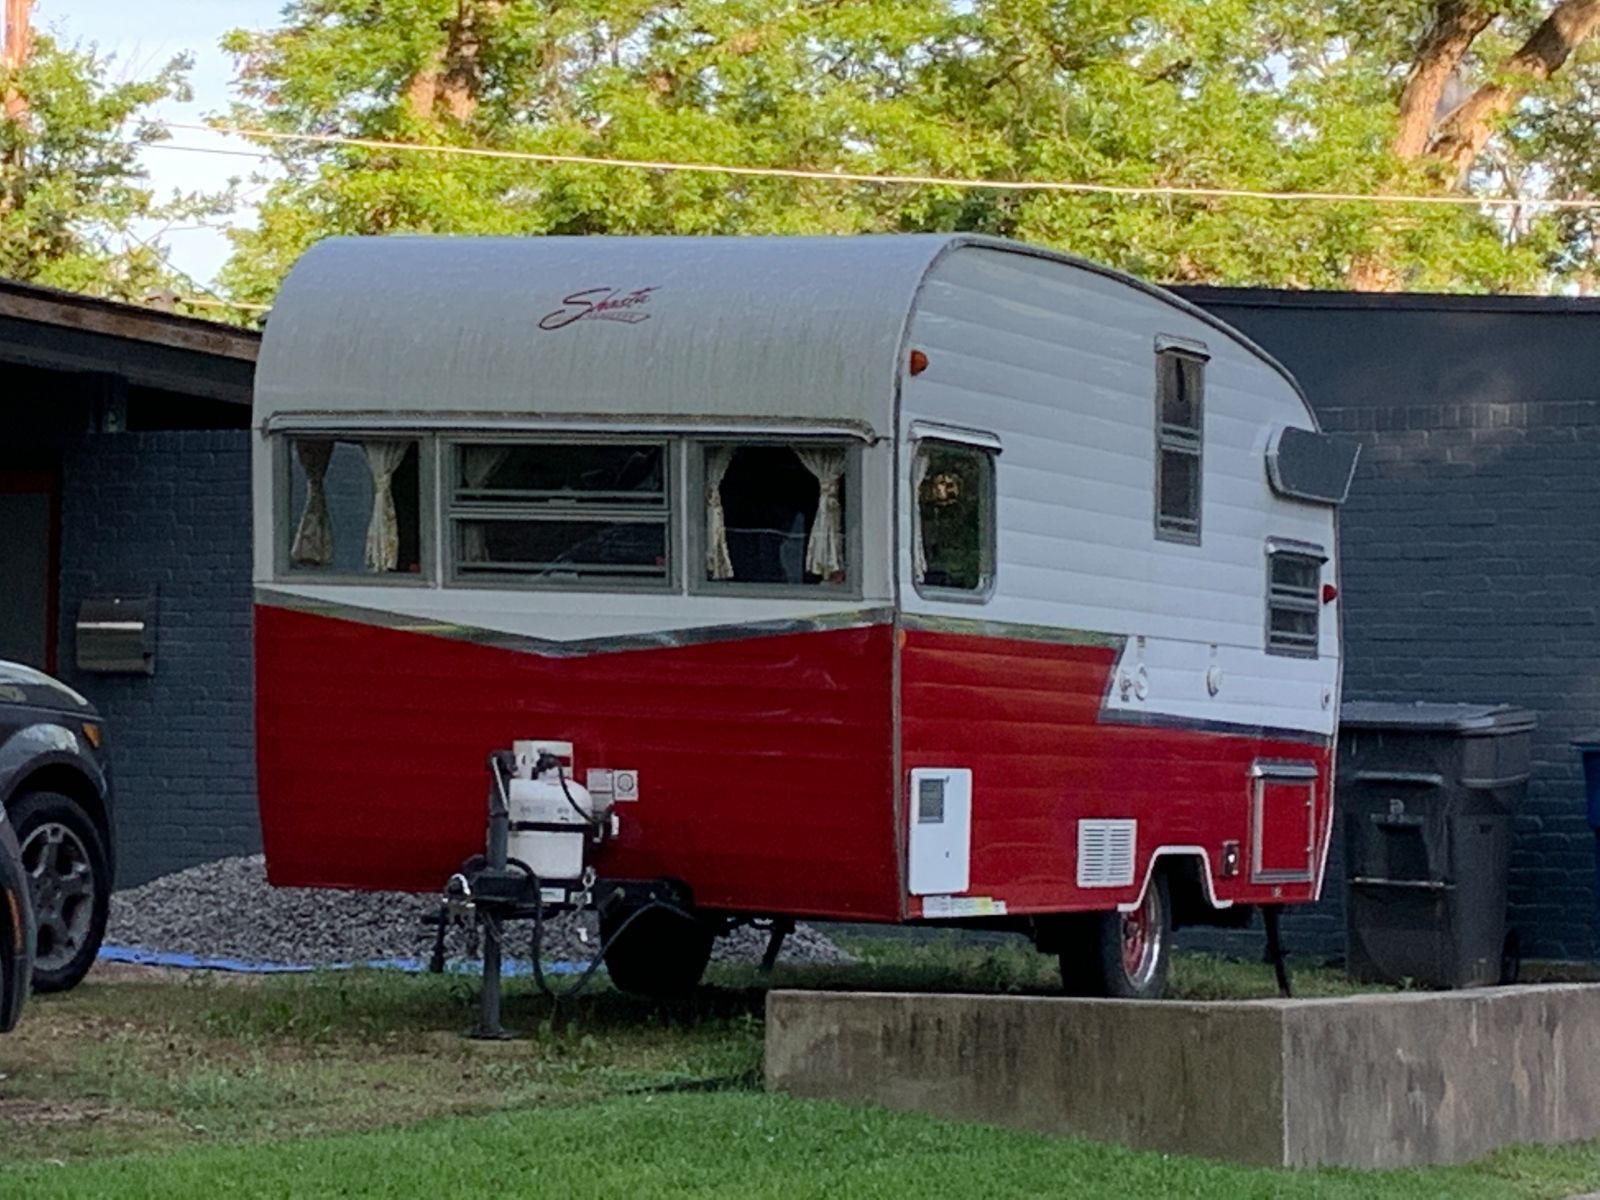 I hear some of you like campers. This one looks vintage and is in good shape. 